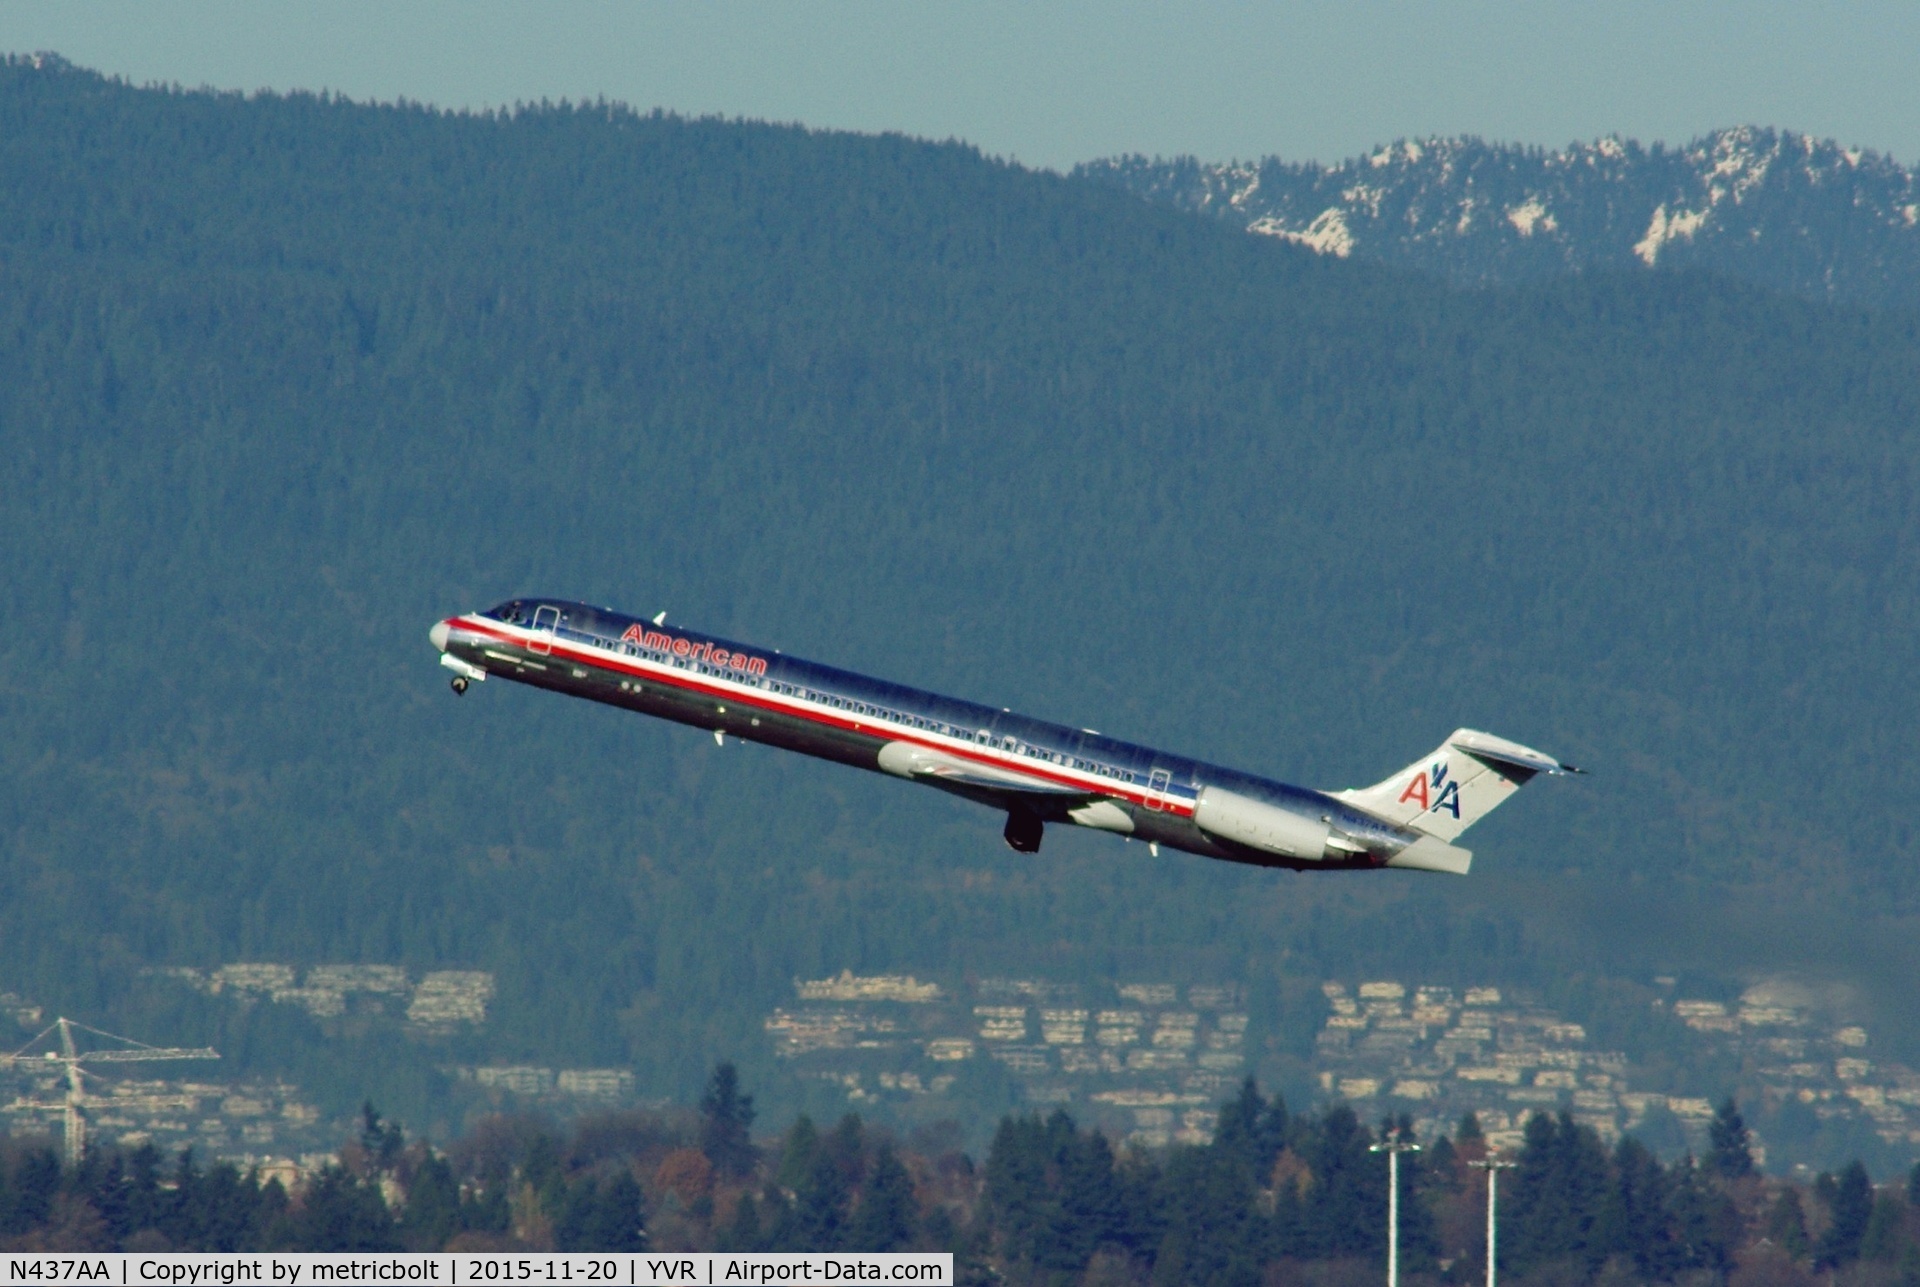 N437AA, 1987 McDonnell Douglas MD-83 (DC-9-83) C/N 49455, Long time no see....AA MD-83 back in YVR